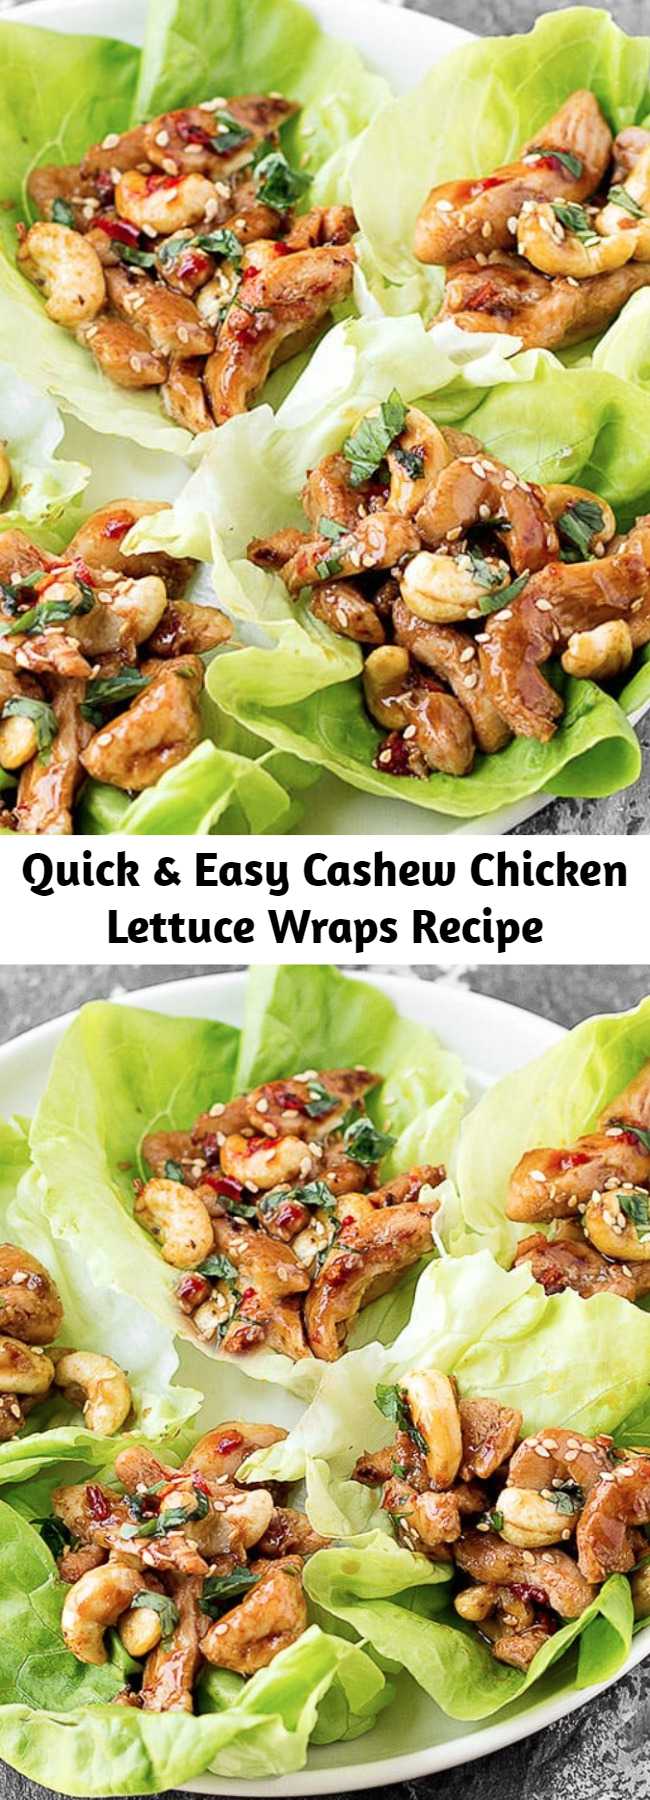 Quick & Easy Cashew Chicken Lettuce Wraps Recipe - These Cashew Chicken Lettuce Wraps are perfect for lunch, dinner, or even as a tasty appetizer. Simple, easy and healthy. Each wrap has only 165 calories!